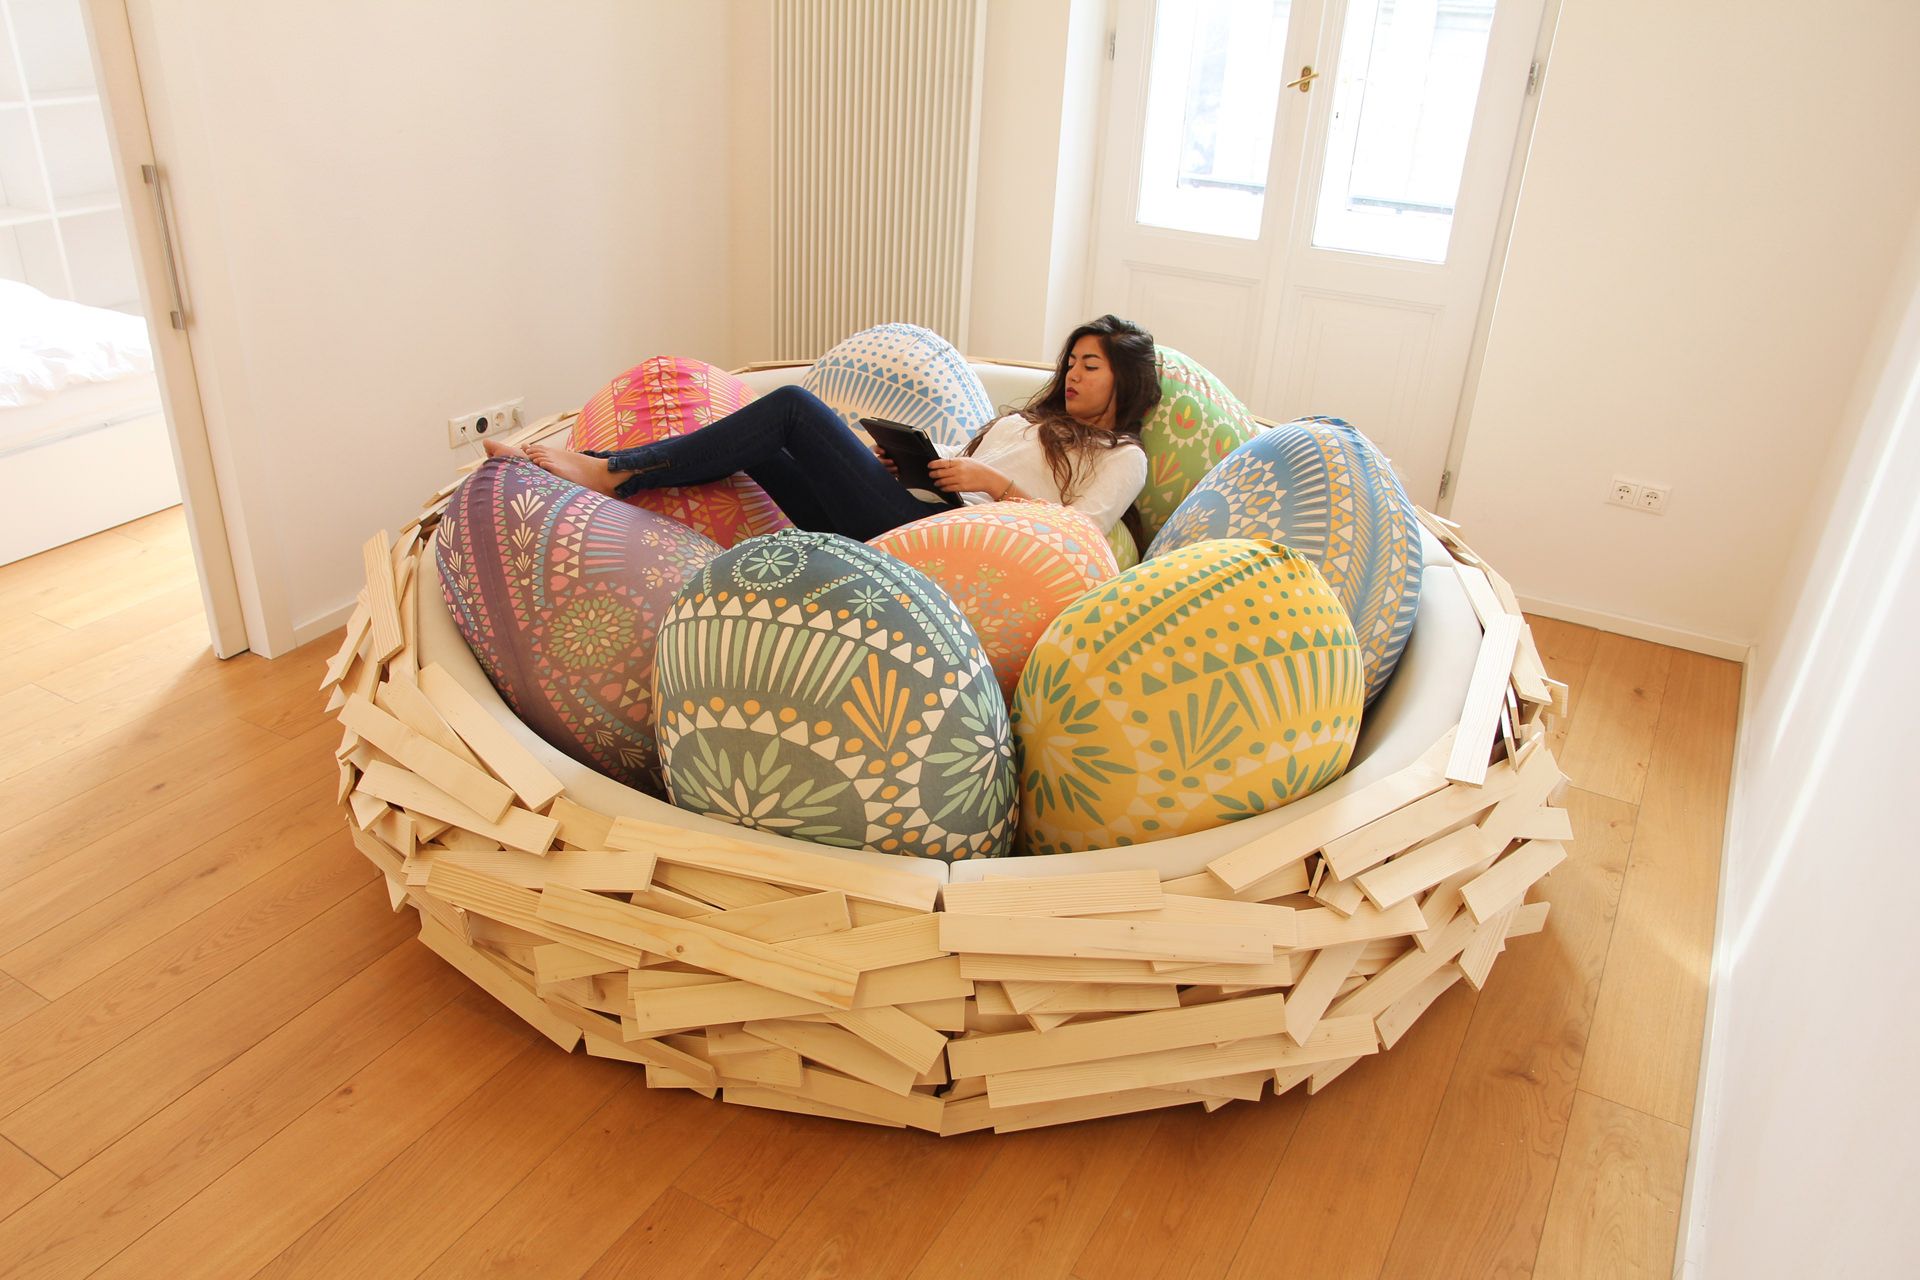 This Giant Bird's Nest Bed Is 